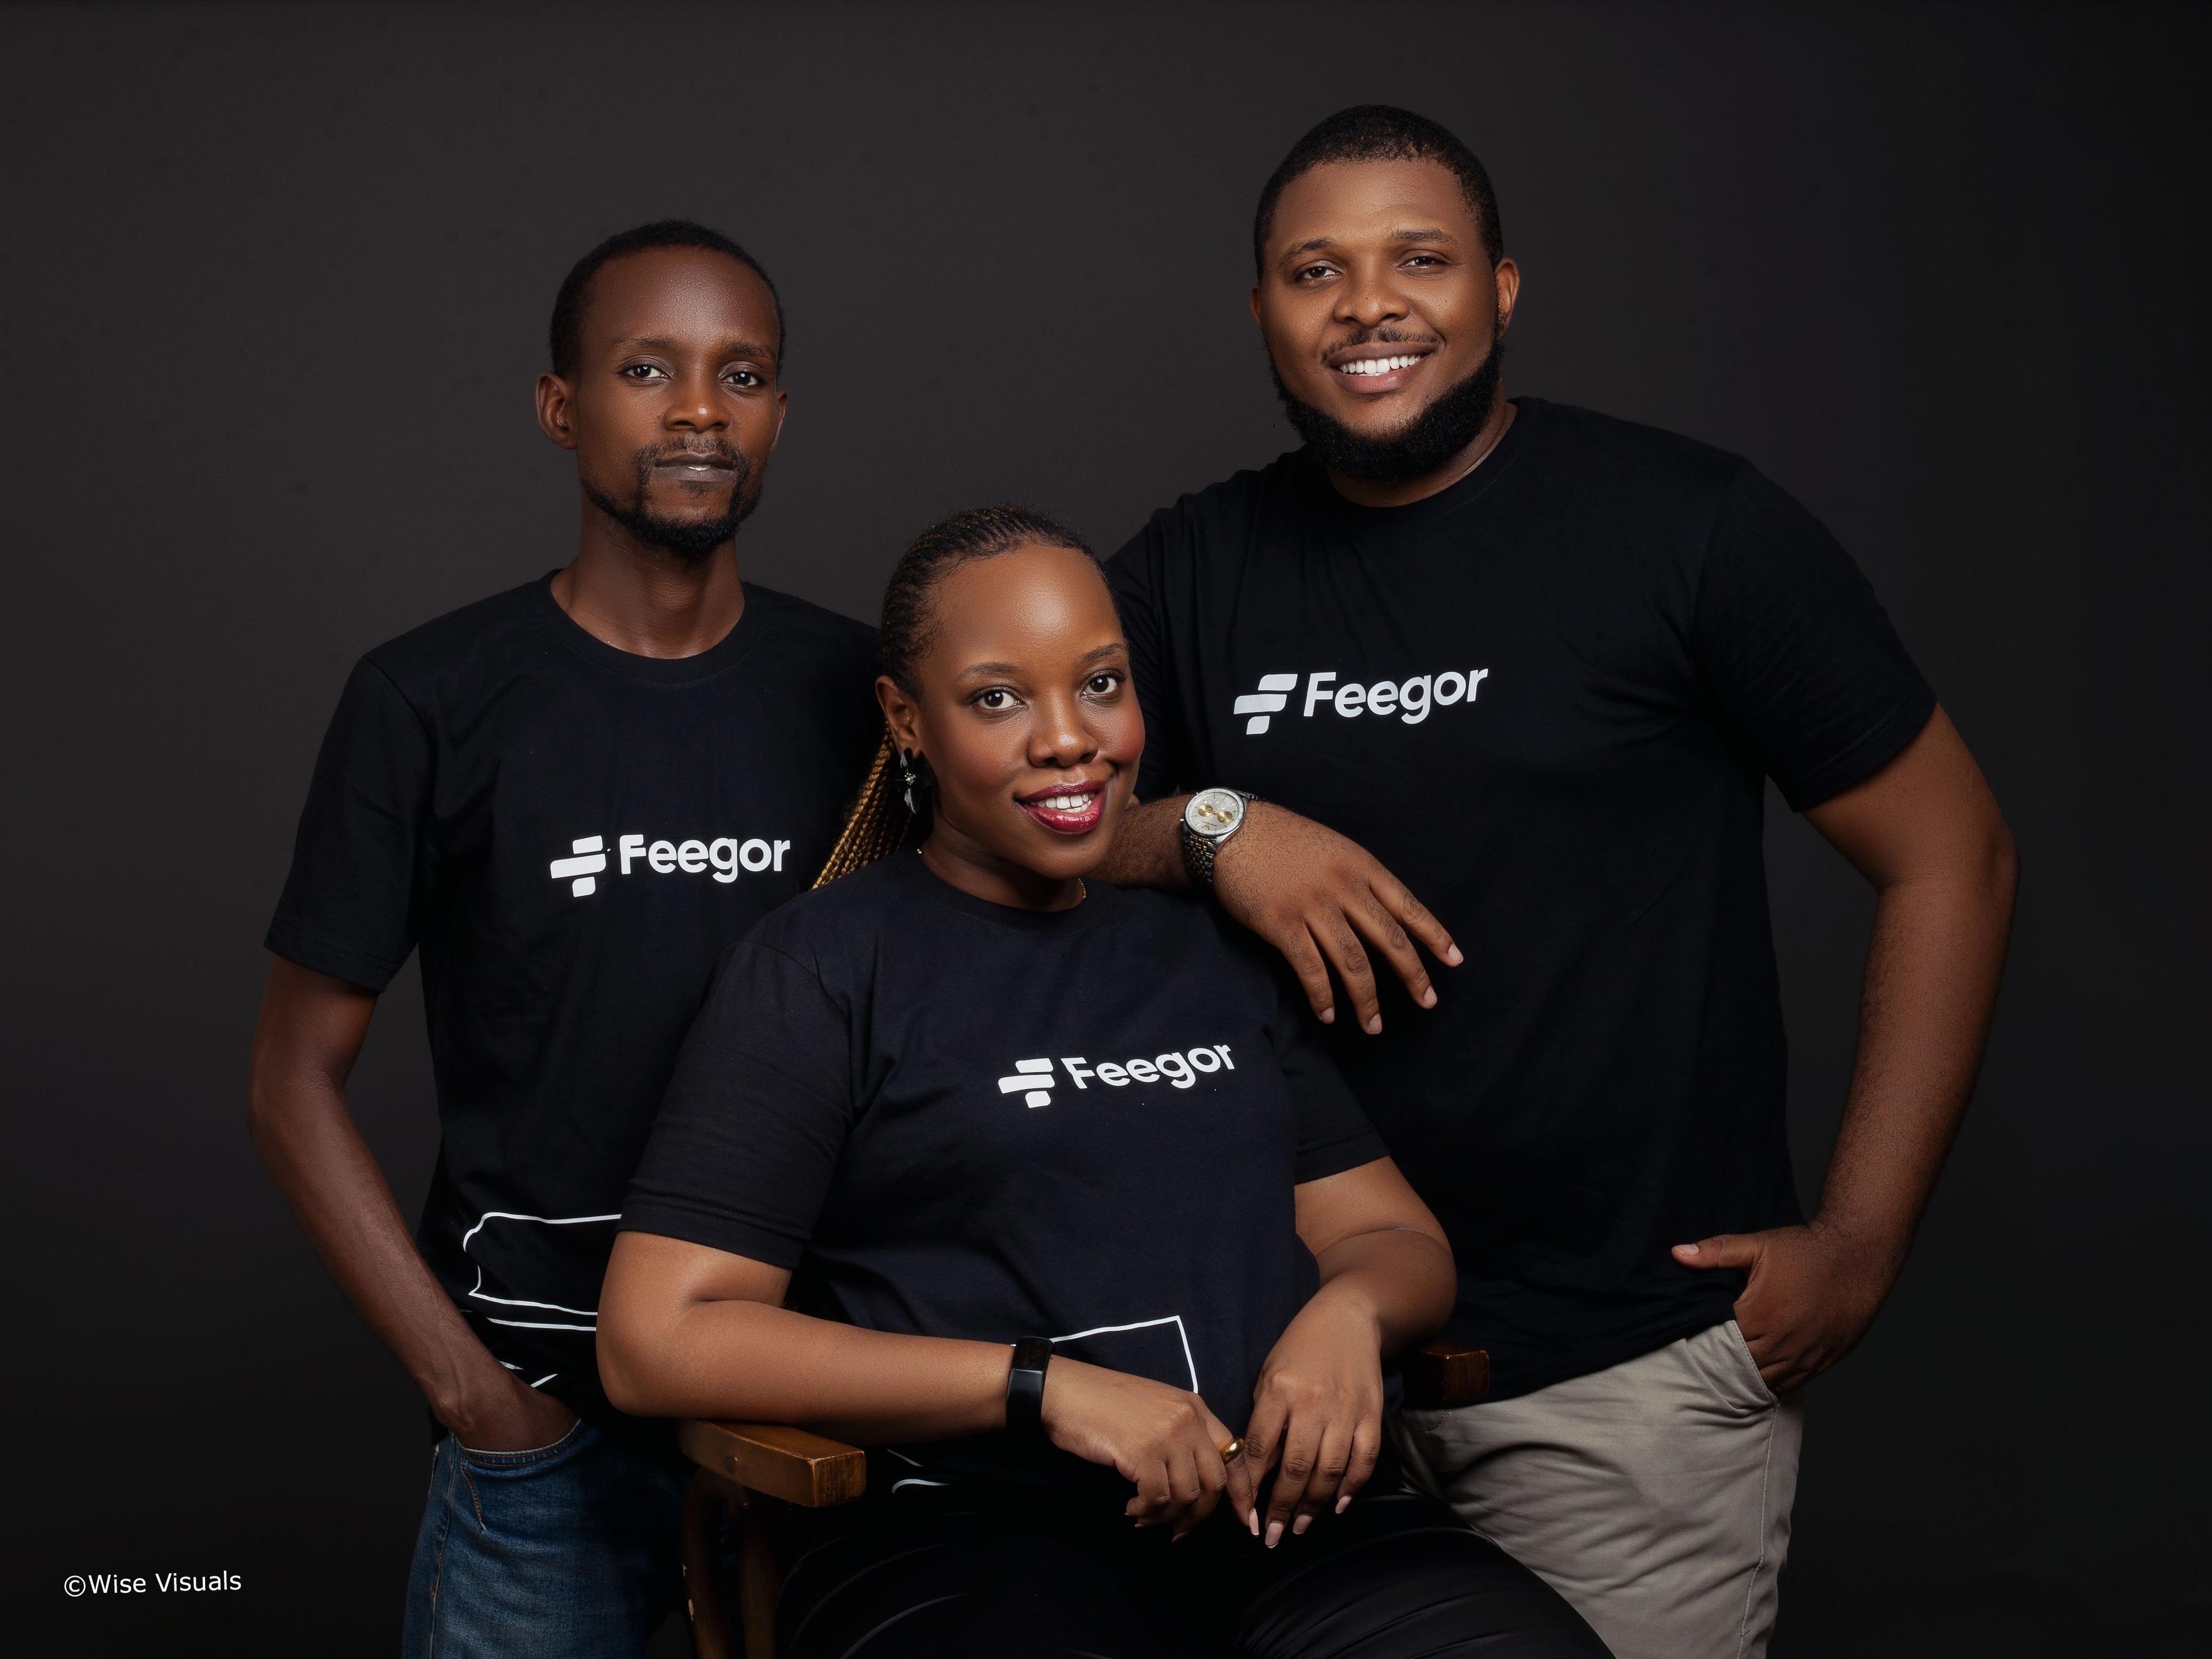 Feegor Revolutionizes B2B Commerce in Nigeria, Empowering SMEs to Streamline Product Sourcing 🇳🇬